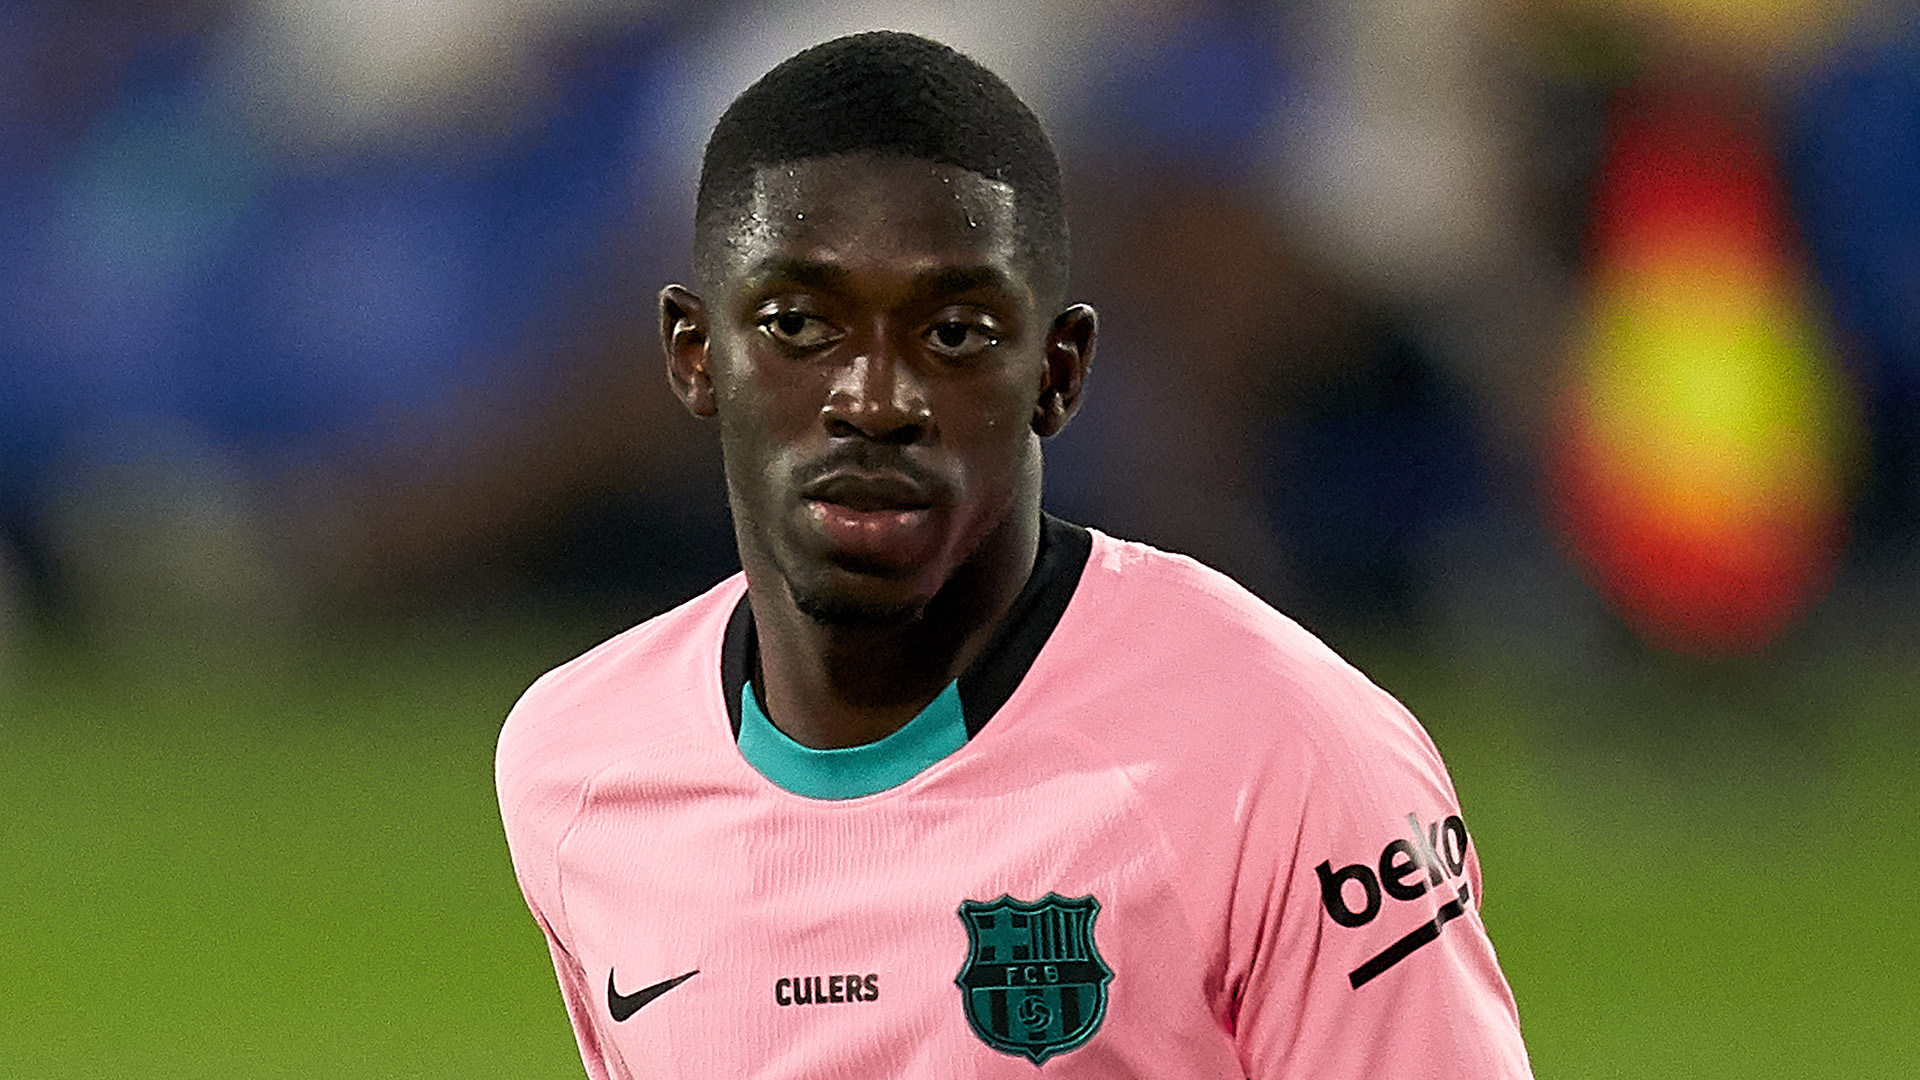 'Dembele needs to prove he wants to play for Barca' - Man Utd-linked